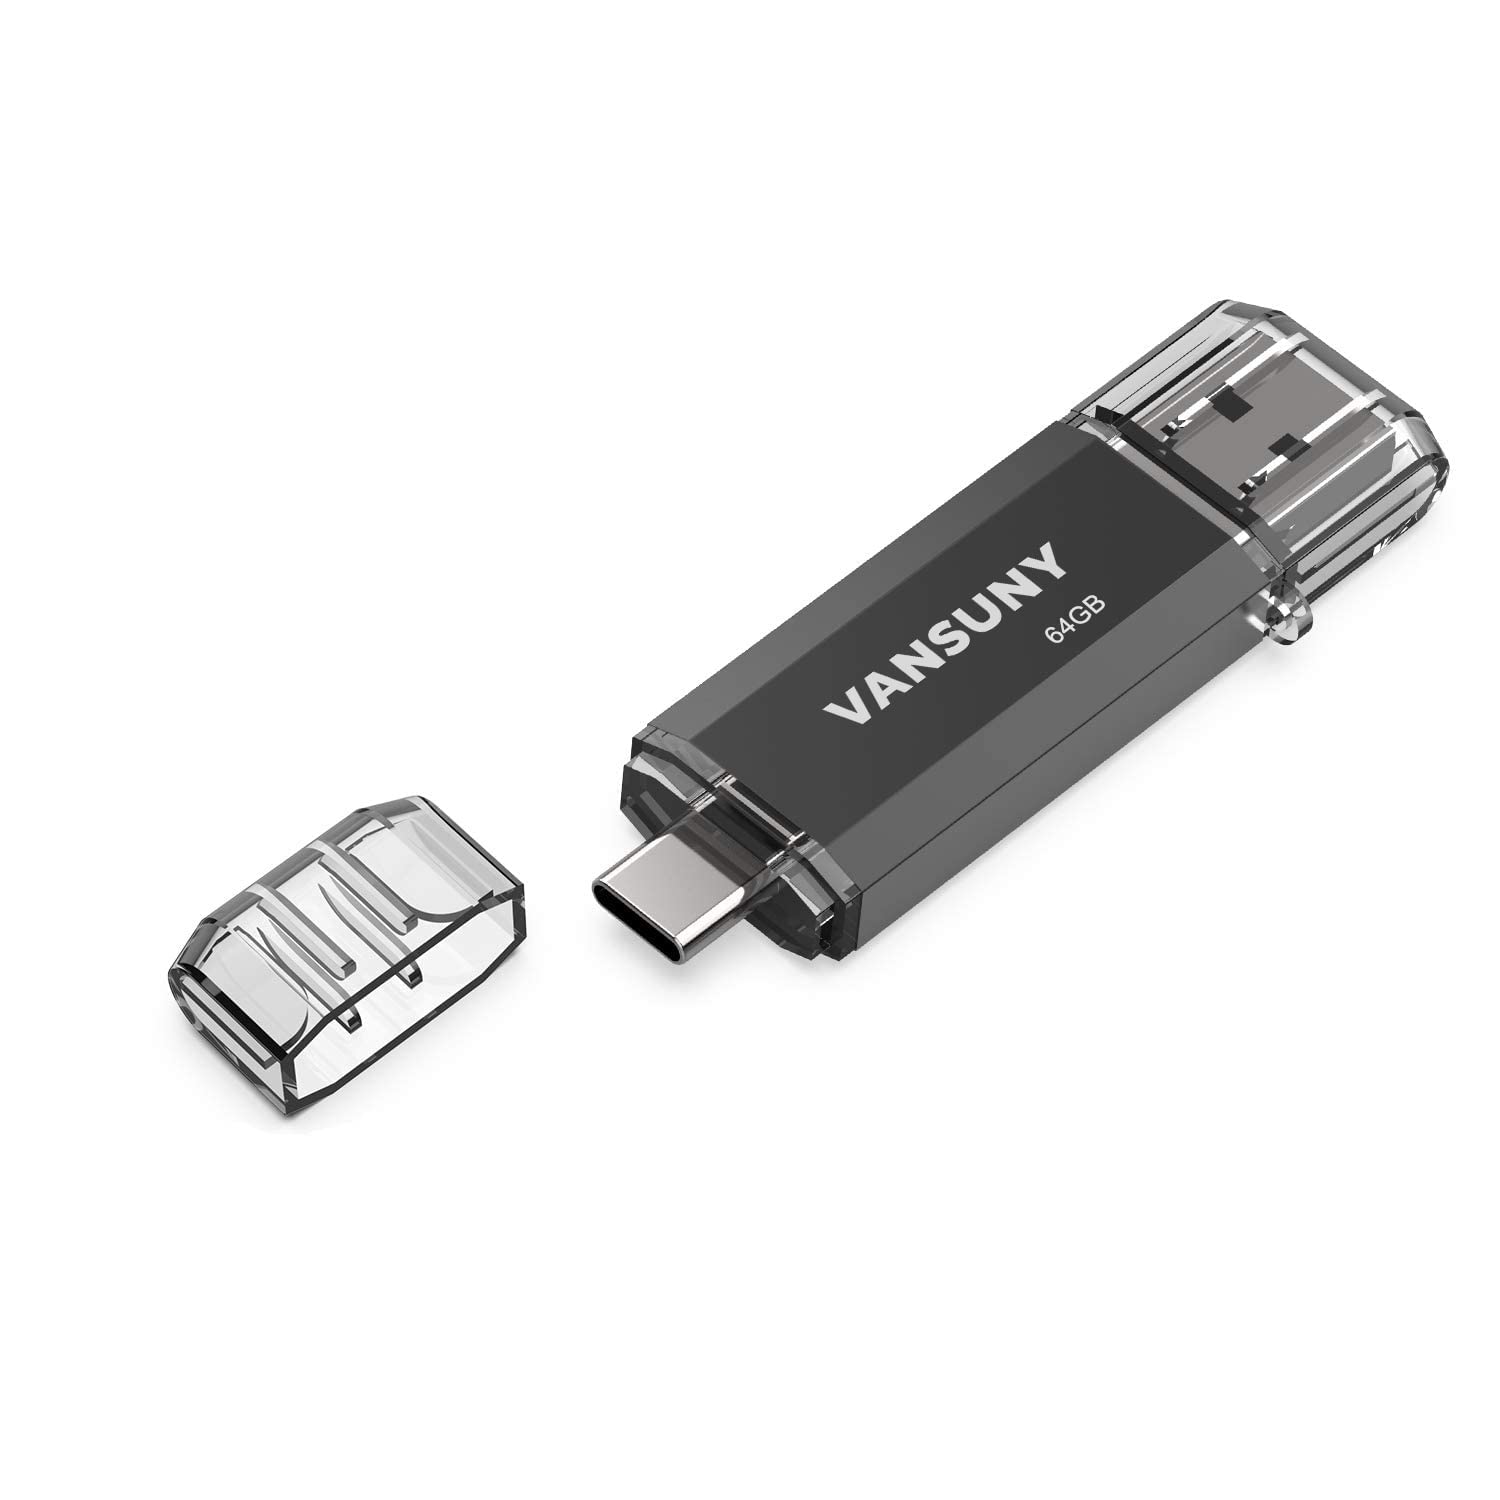 Restart your computer:
Try a different flash drive: Test if another flash drive fits in the USB port.